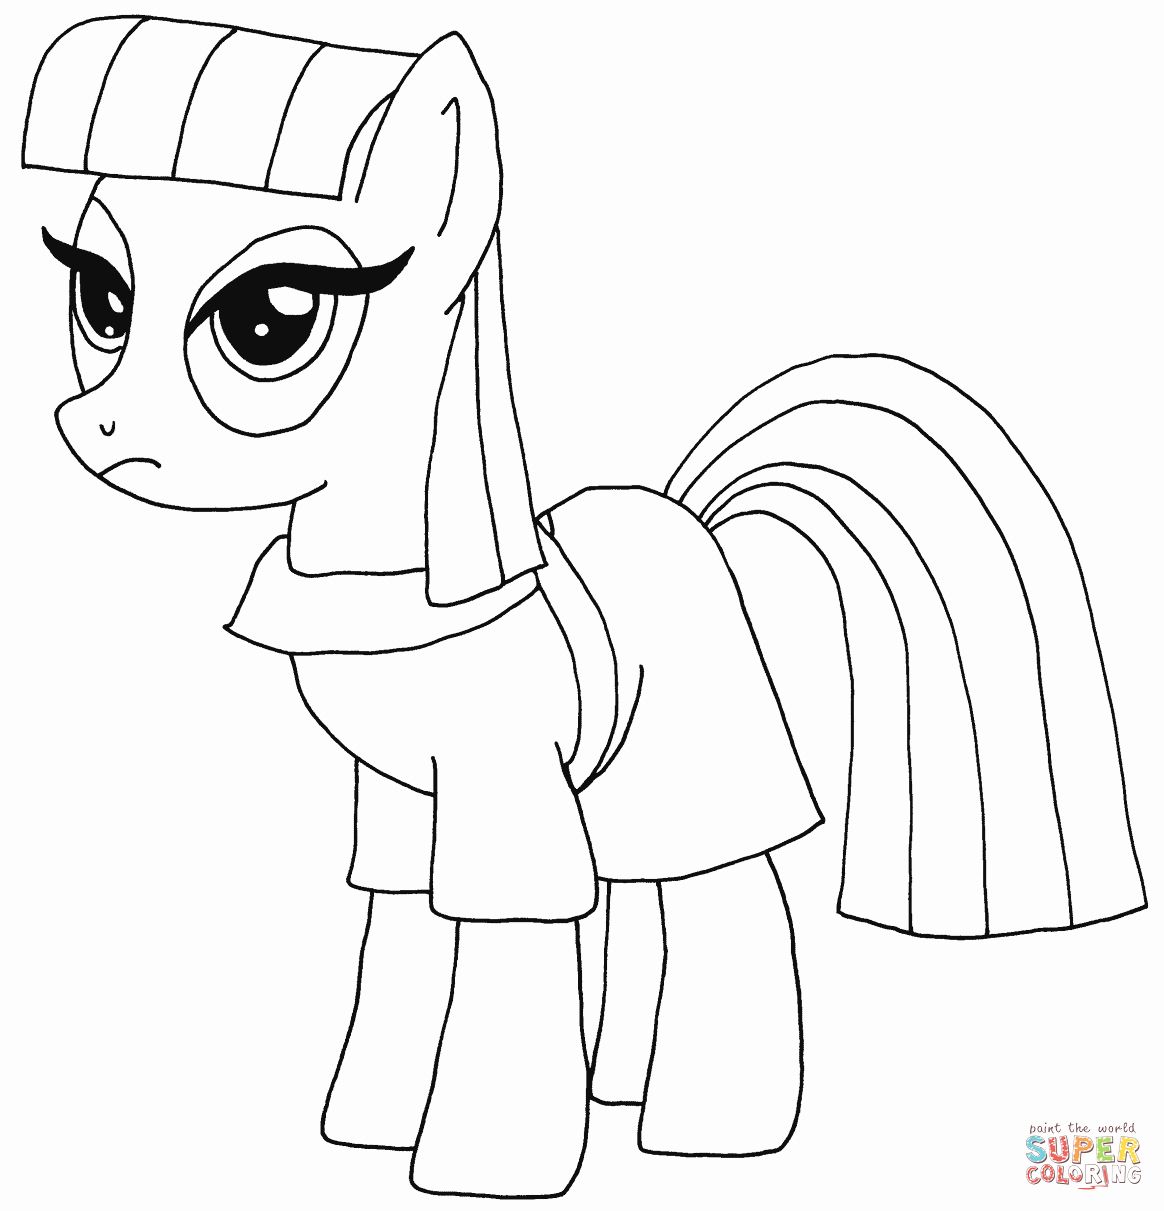 Pin by Lill-Charine Øvrum on Håndverk for barn | My little pony coloring,  Cartoon coloring pages, My little pony rarity